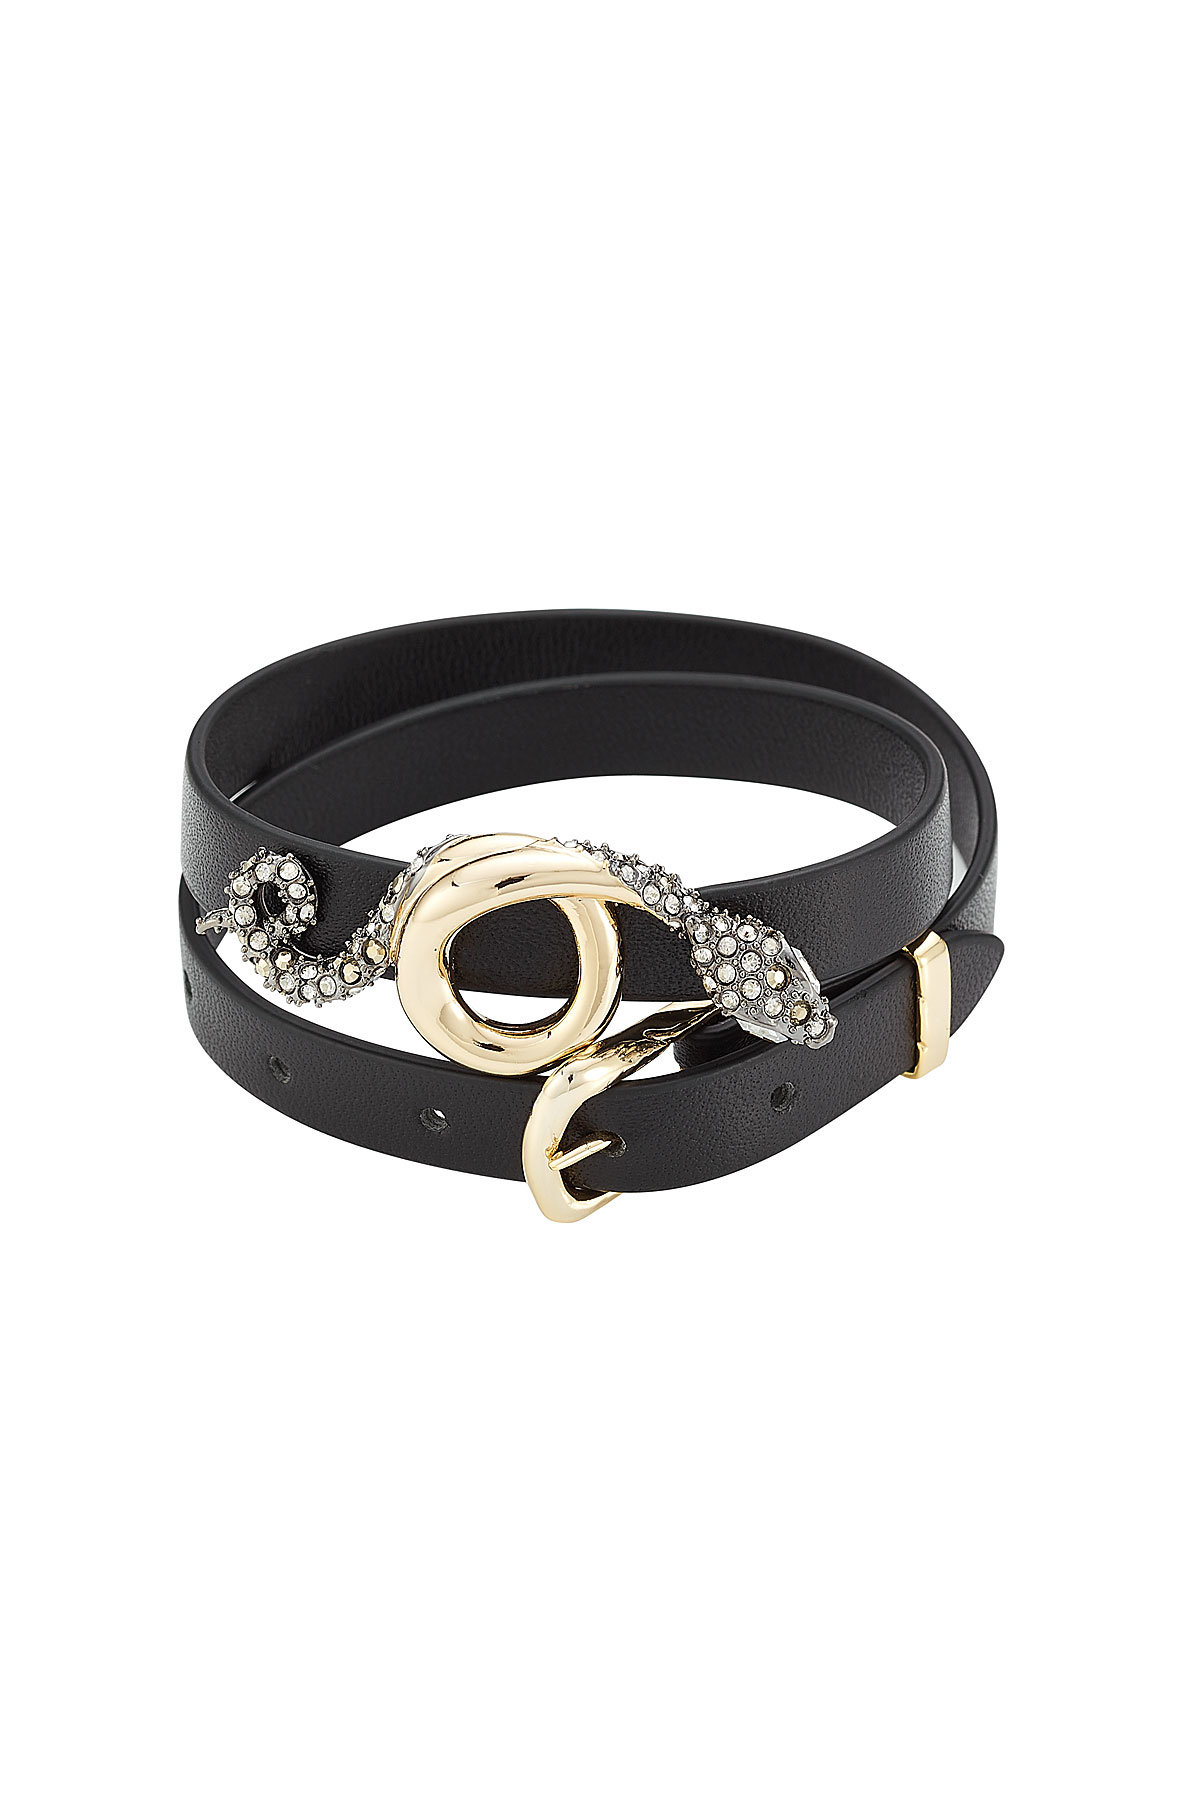 Leather Bracelet with 10kt Gold and Crystals by Alexis Bittar